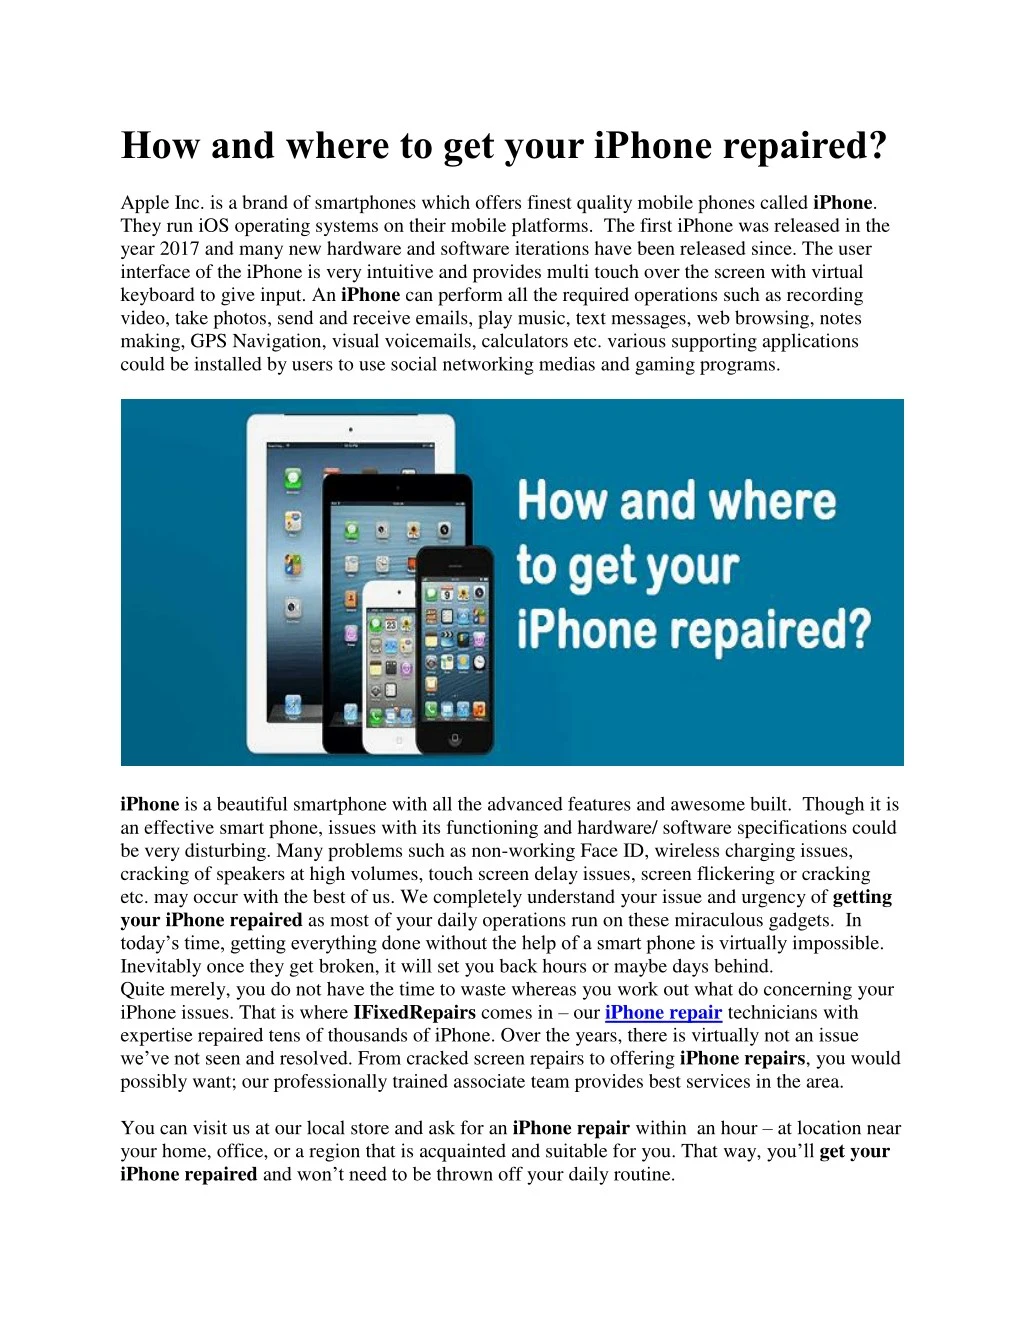 how and where to get your iphone repaired